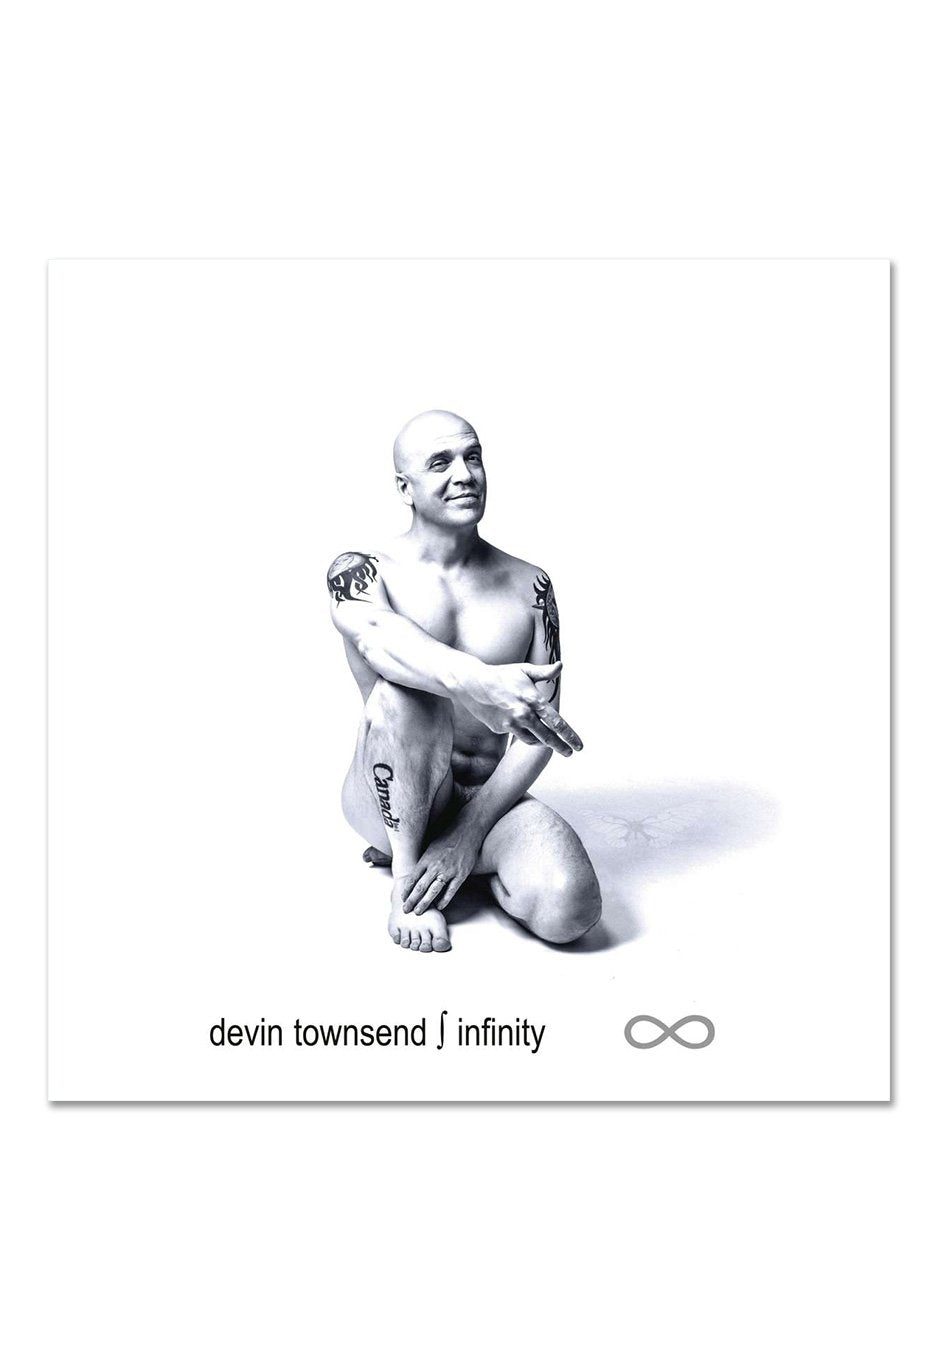 Devin Townsend - Infinity (Limited 25th Anniversary) - Digipak 2 CD